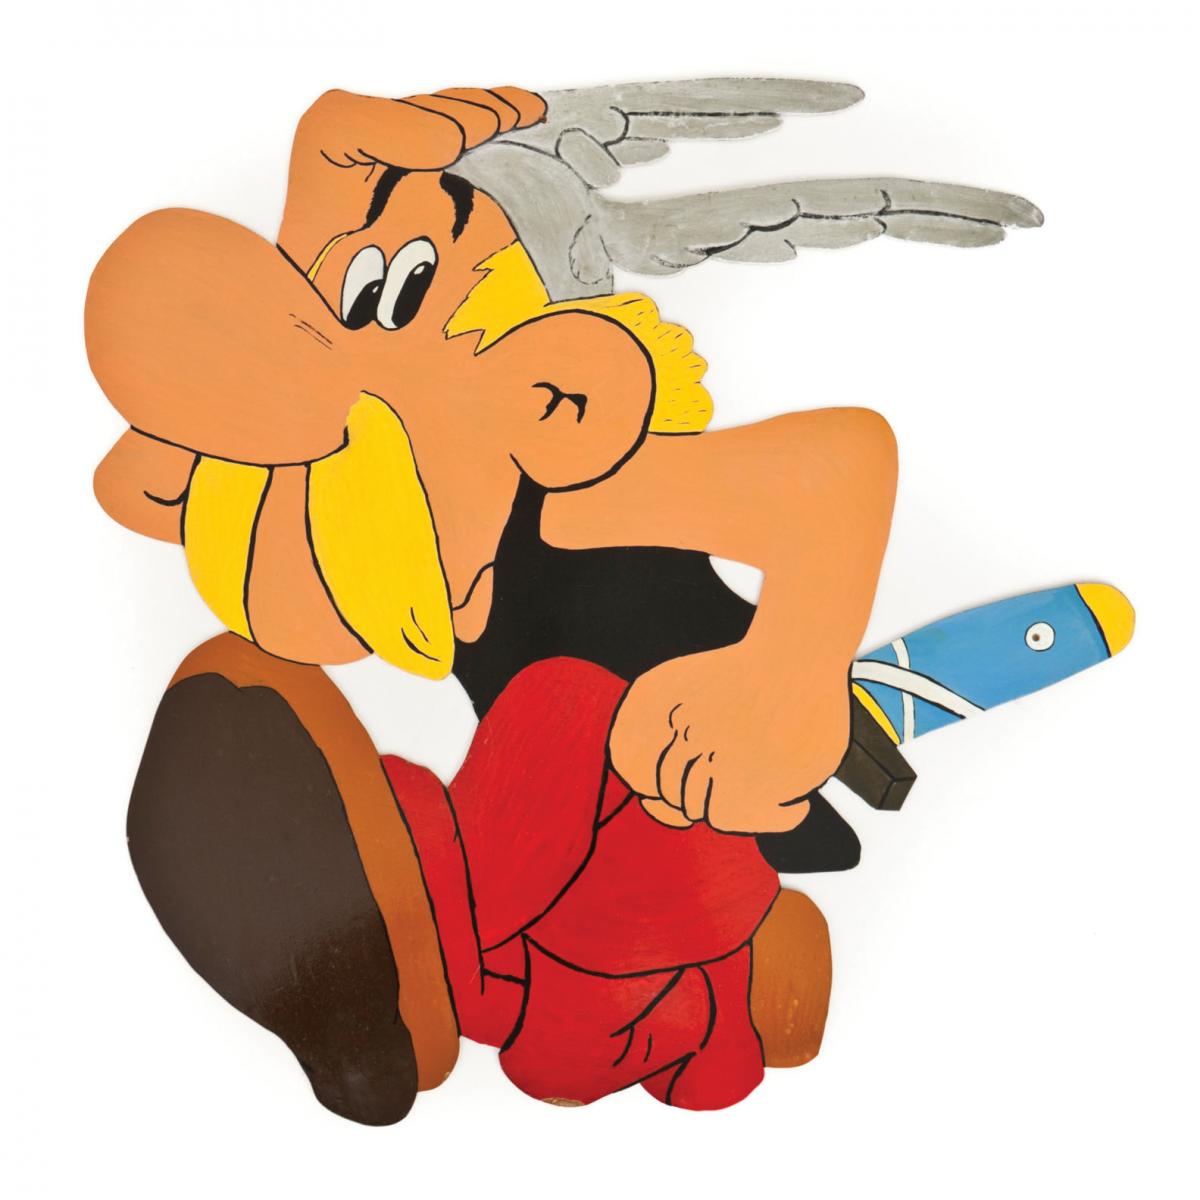 Astérix, a cartoon character with a yellow mustache, wearing red pants and carrying a sword